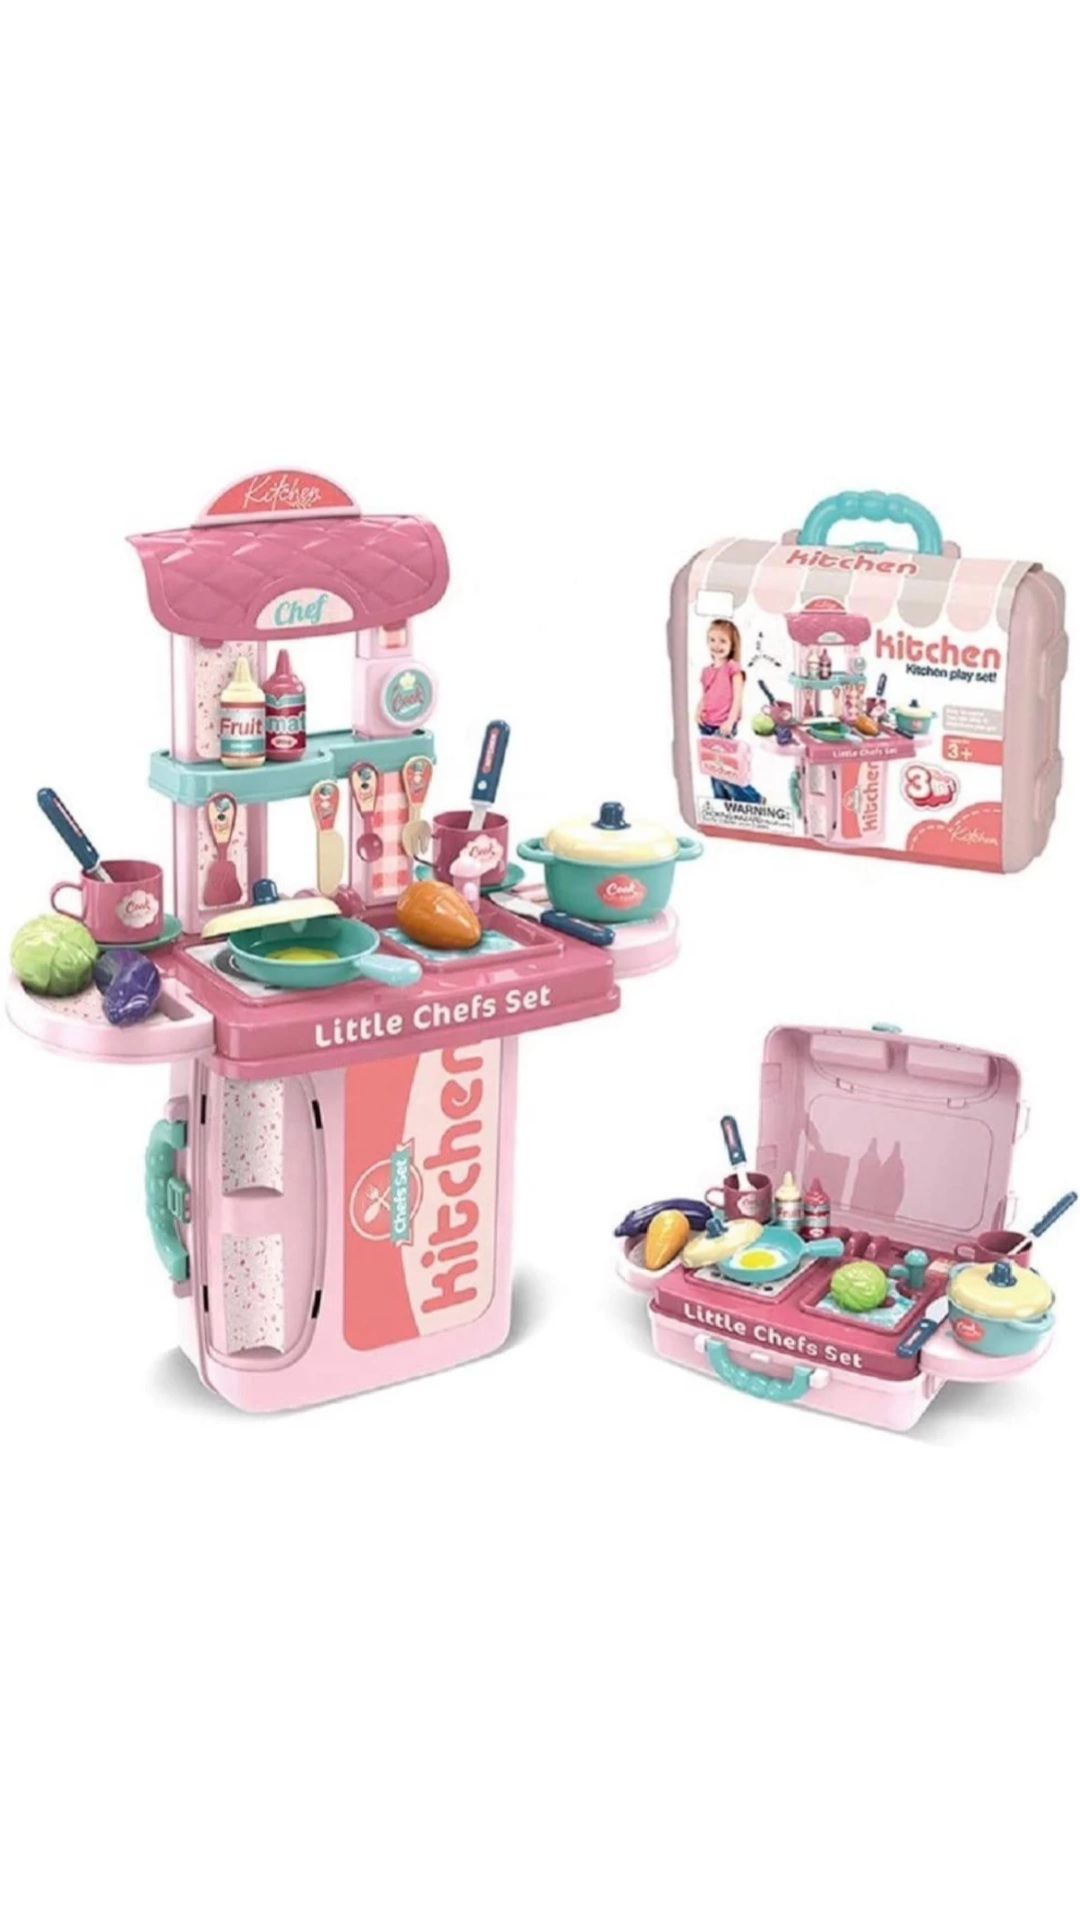 3 in 1 kitchen cooking set with cute portable suitcase